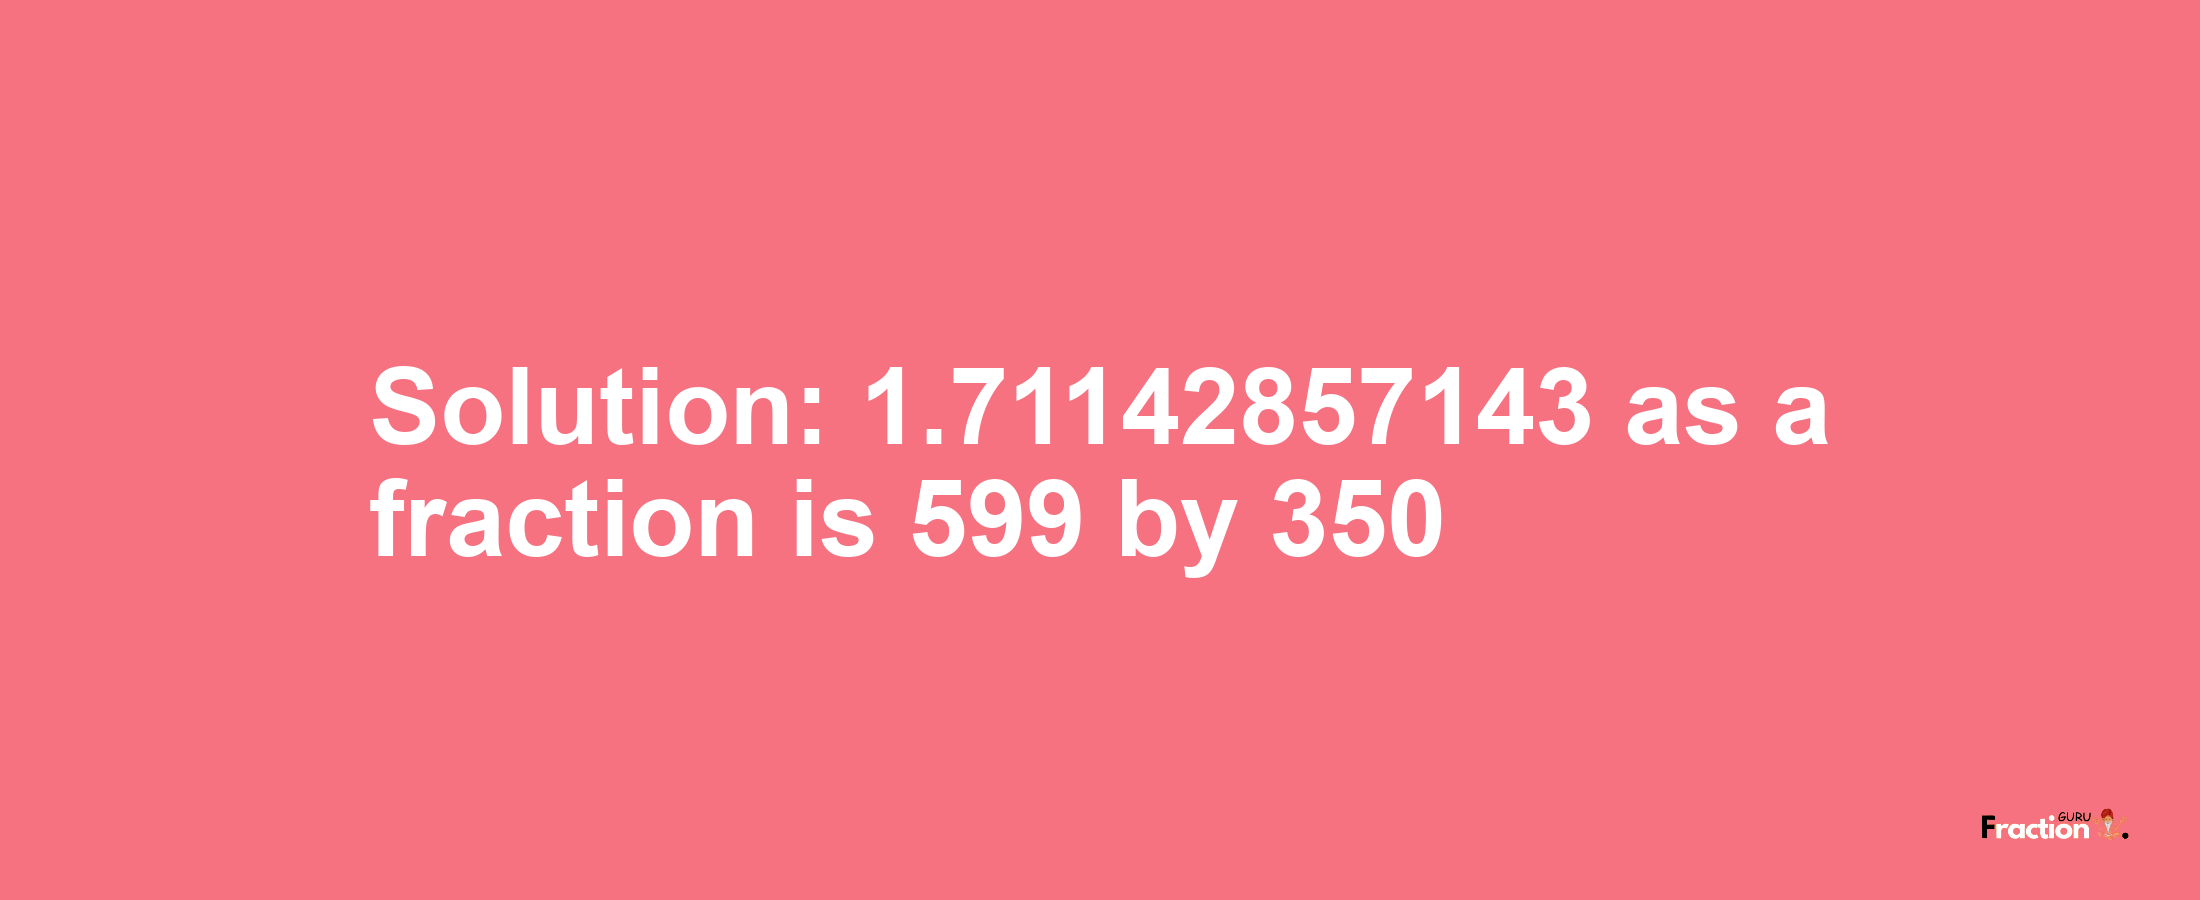 Solution:1.71142857143 as a fraction is 599/350